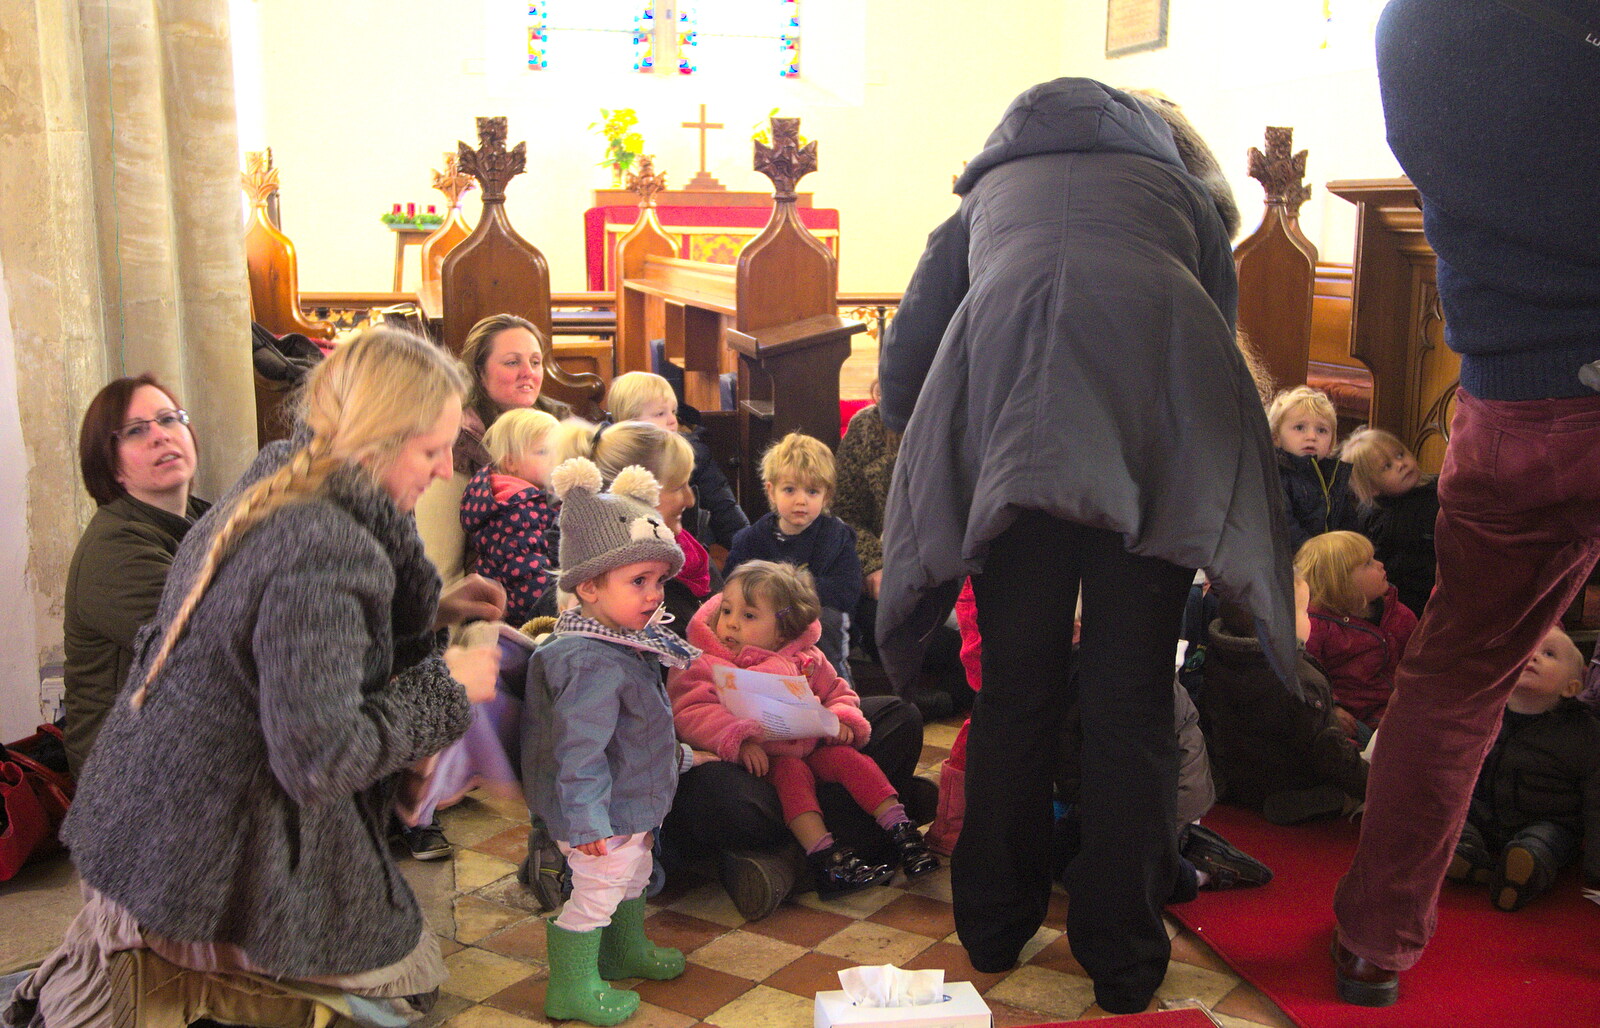 It's organised chaos in the church from Fred's Nursery Nativity, Palgrave, Suffolk - 13th December 2012